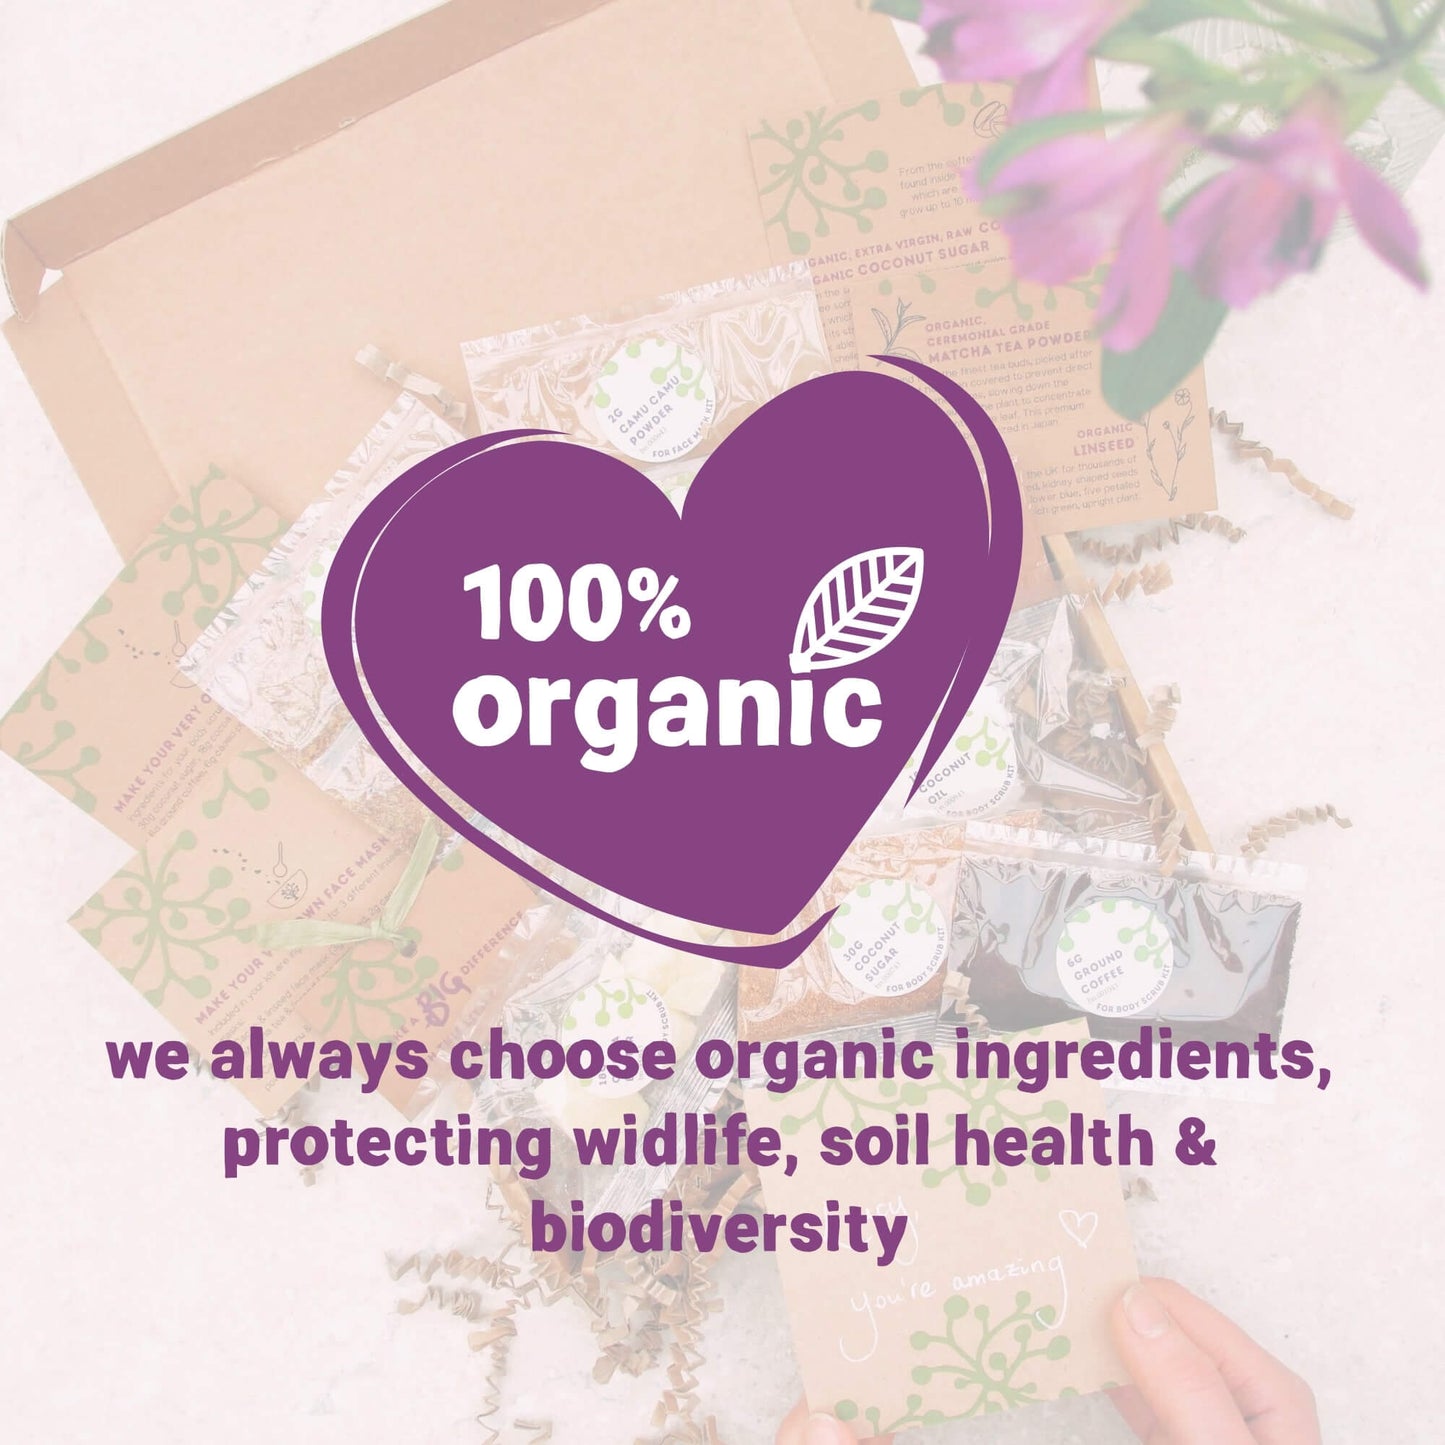 choose organic ingredients to support the environment in our pamper kit gift